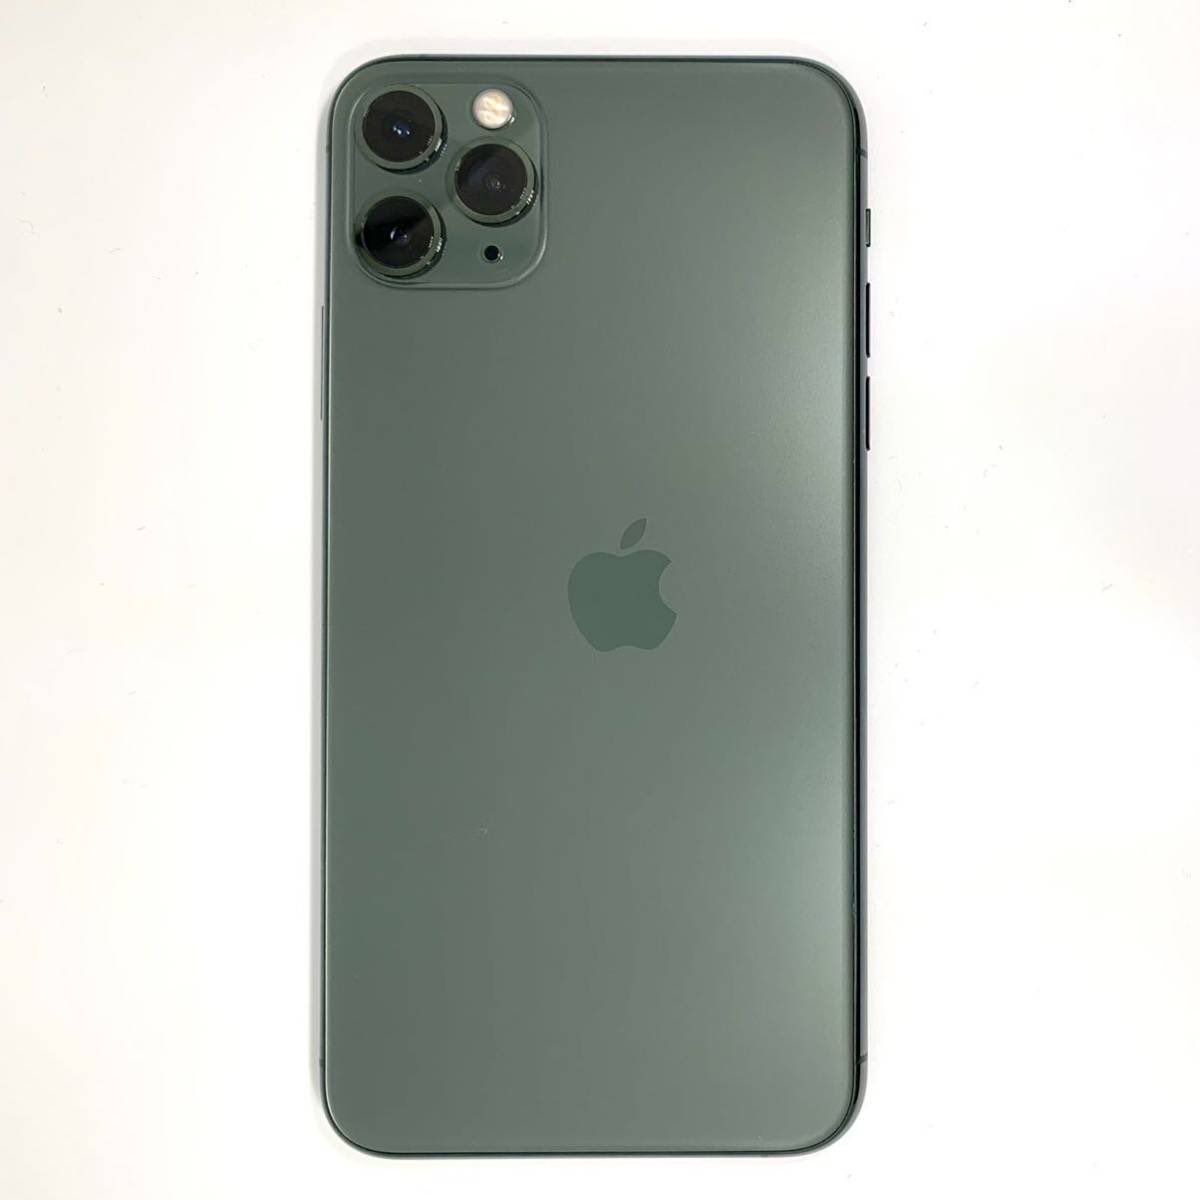 This iPhone 11 Pro comes with a rare mistake, sells for ...